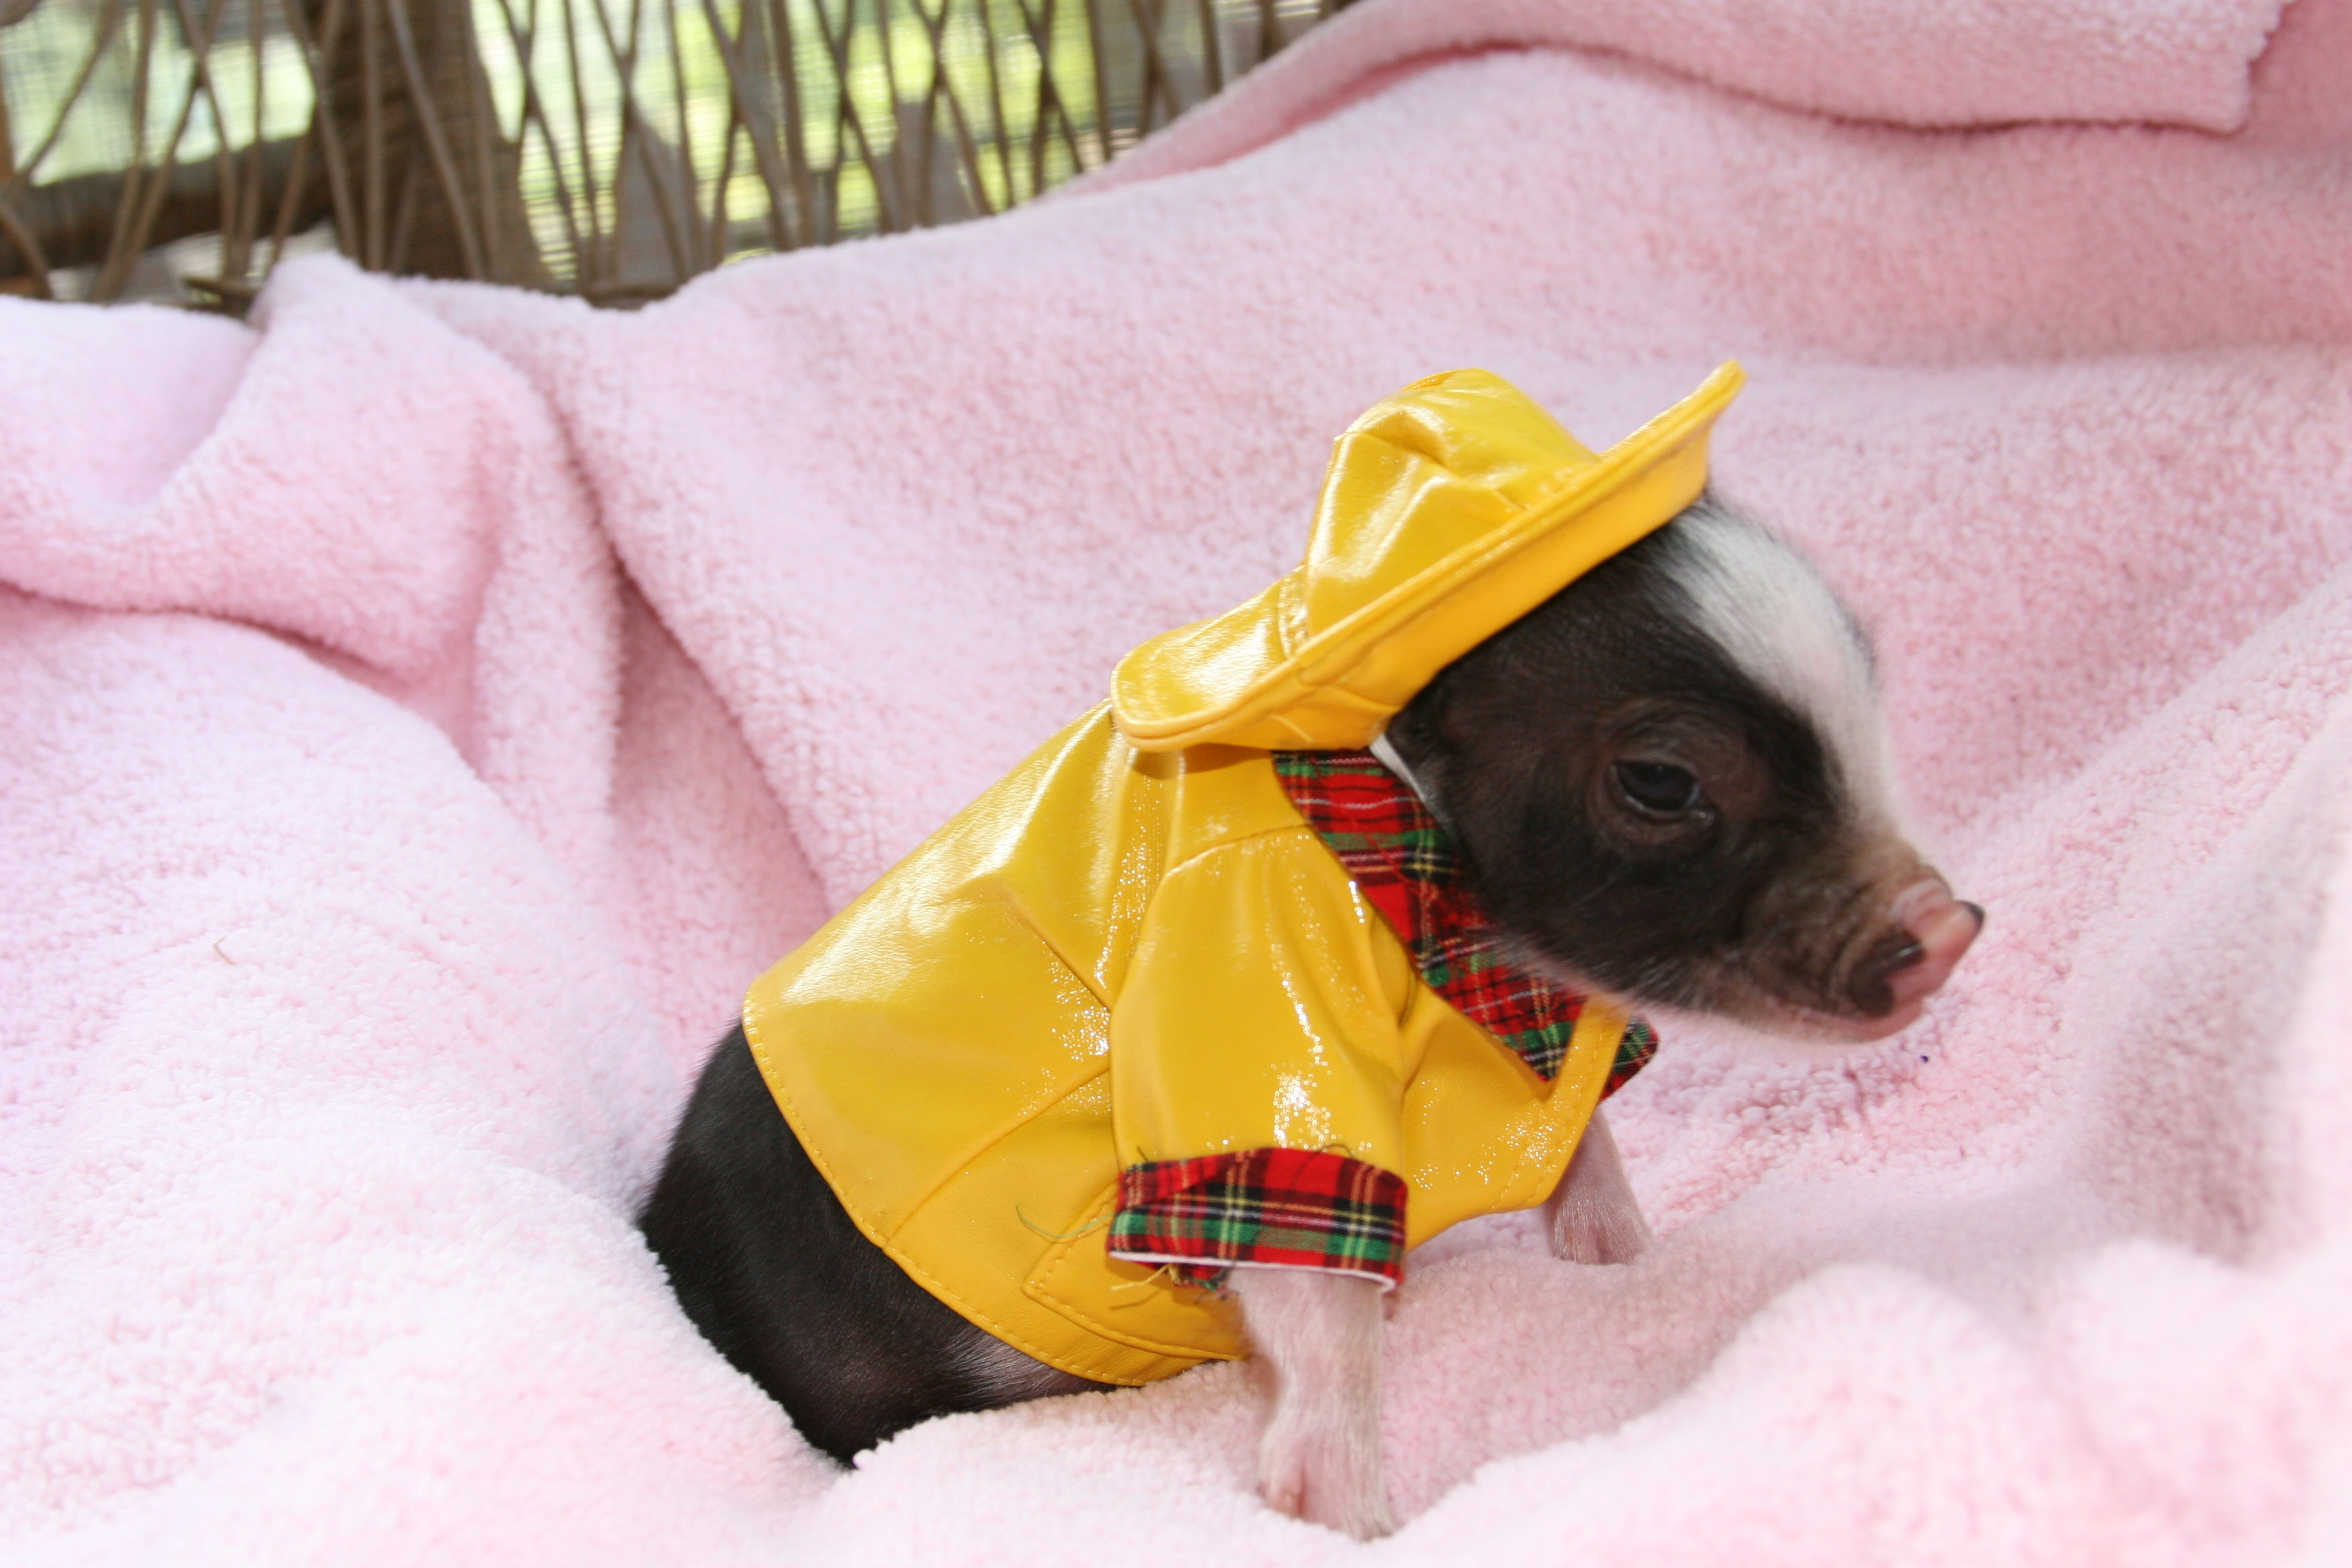 pig in red rain boots